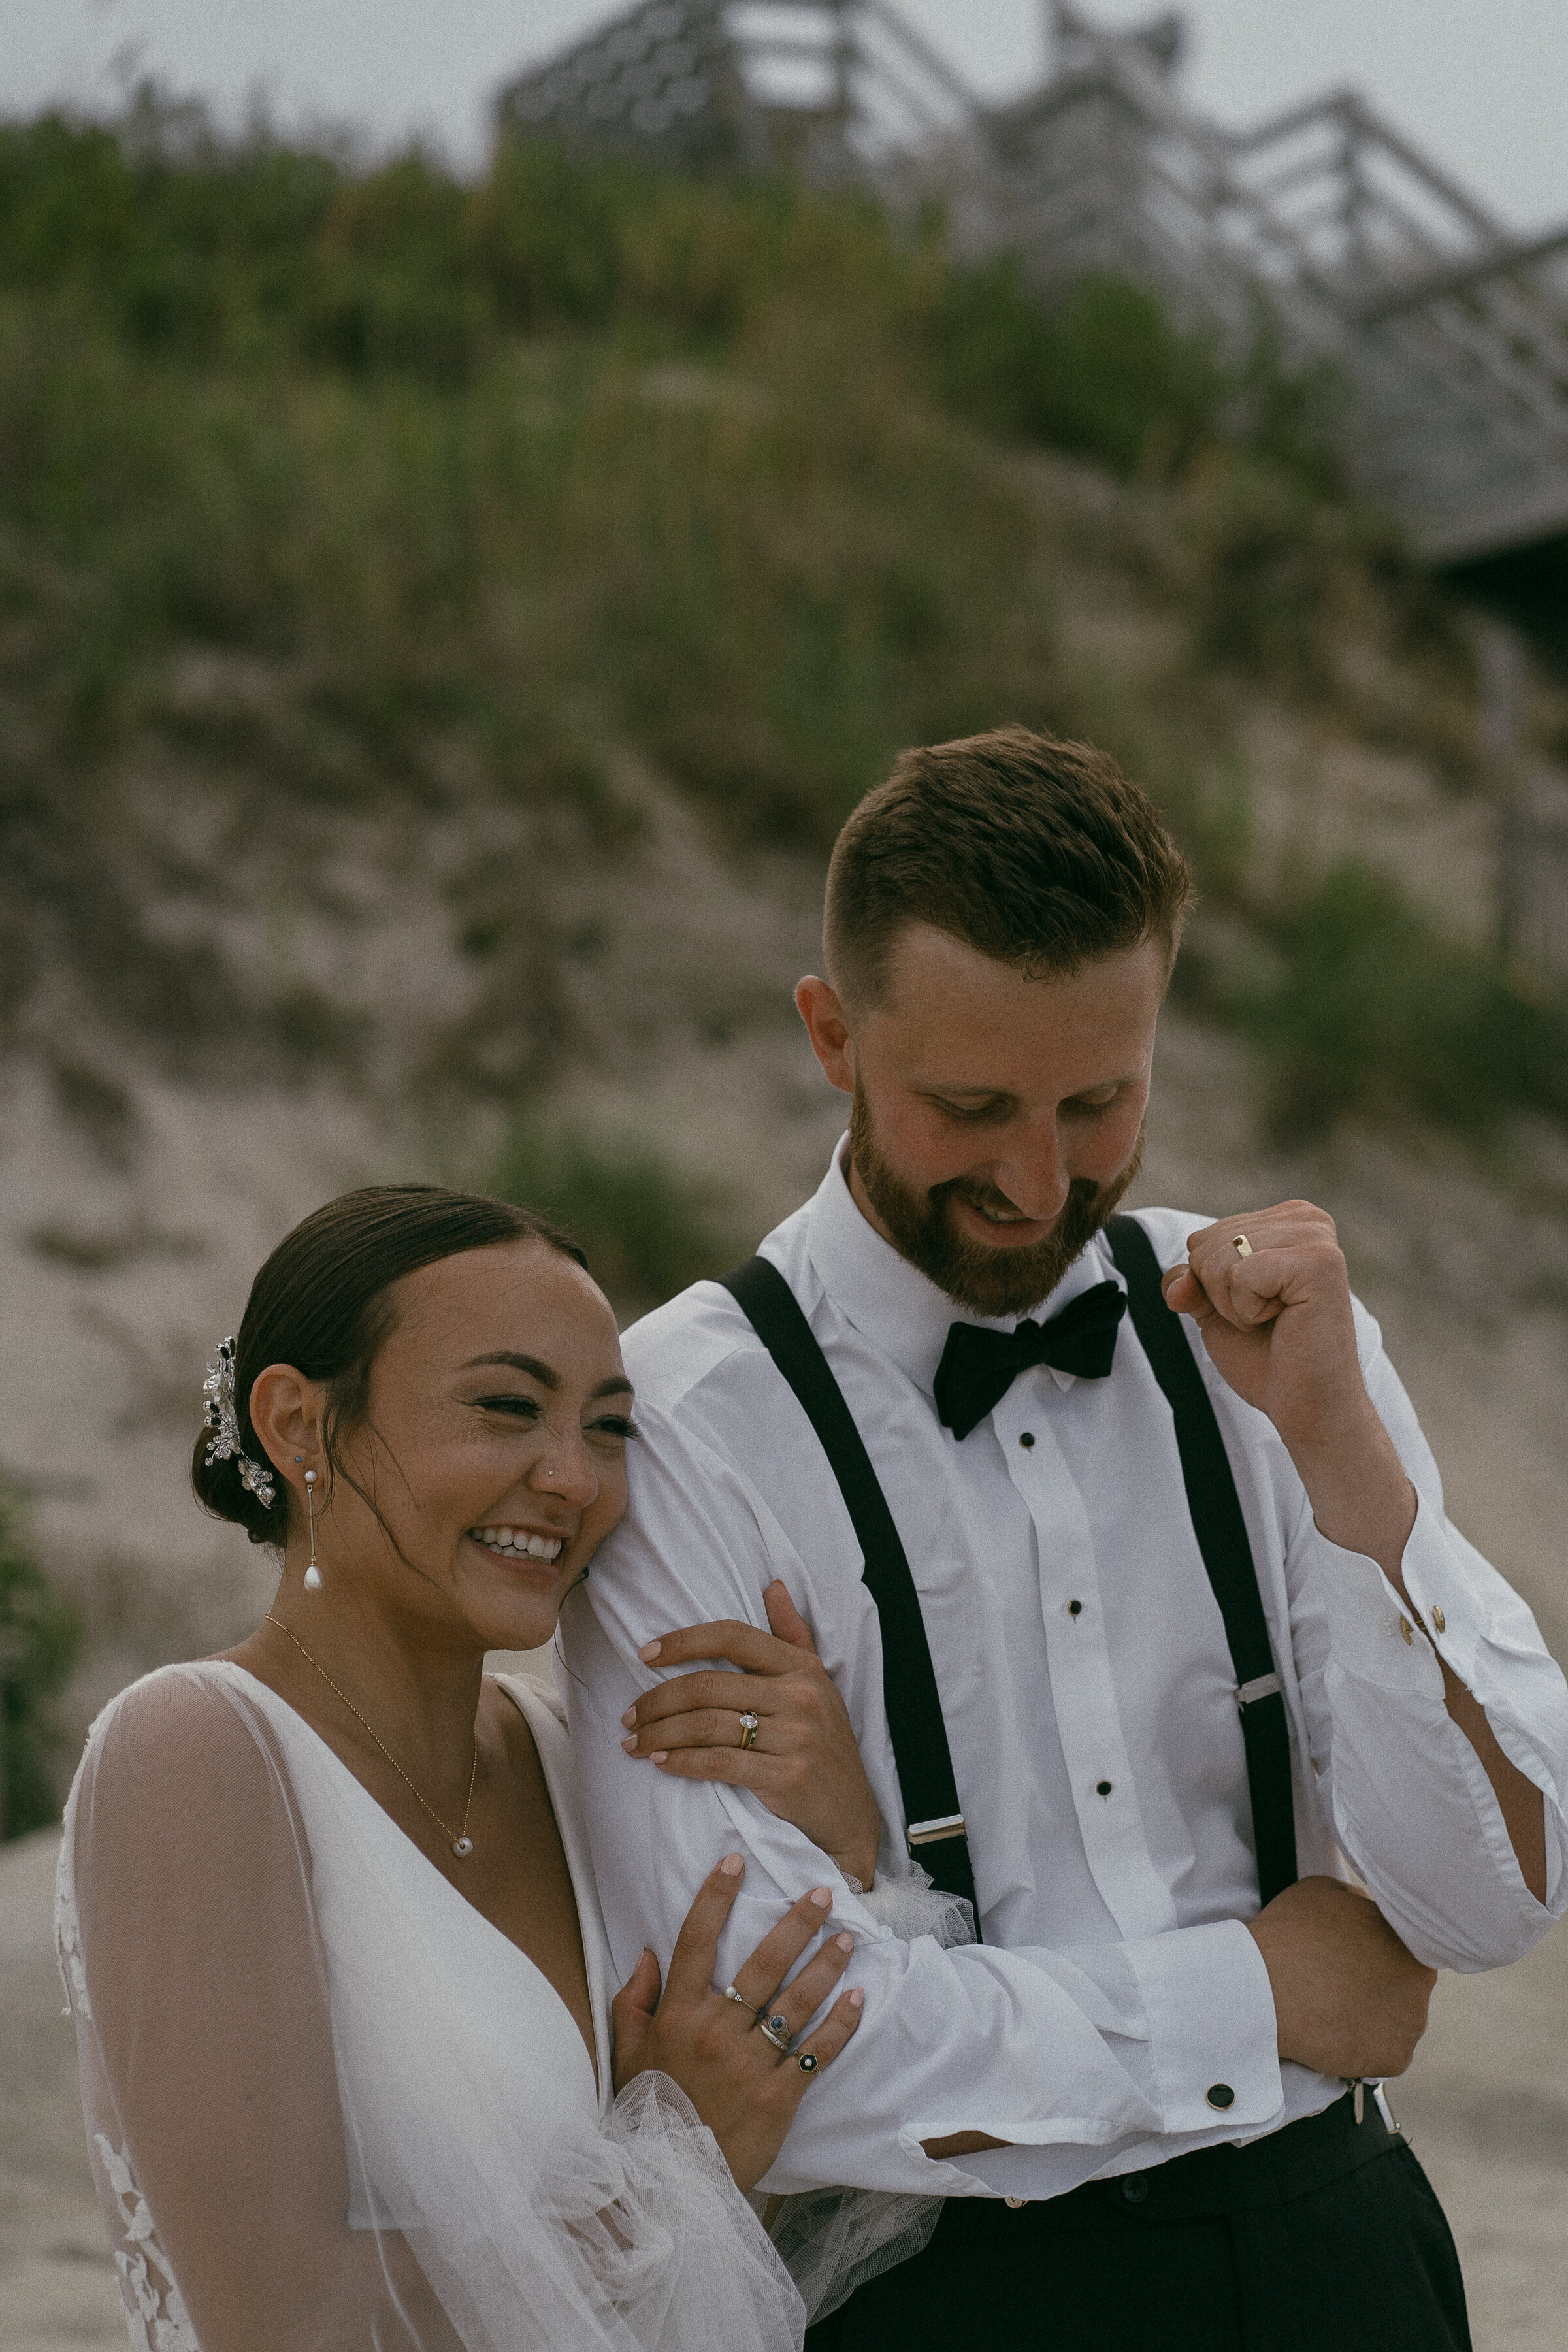 Groom adjusting his bow tie with bride laughing beside him on the beach.